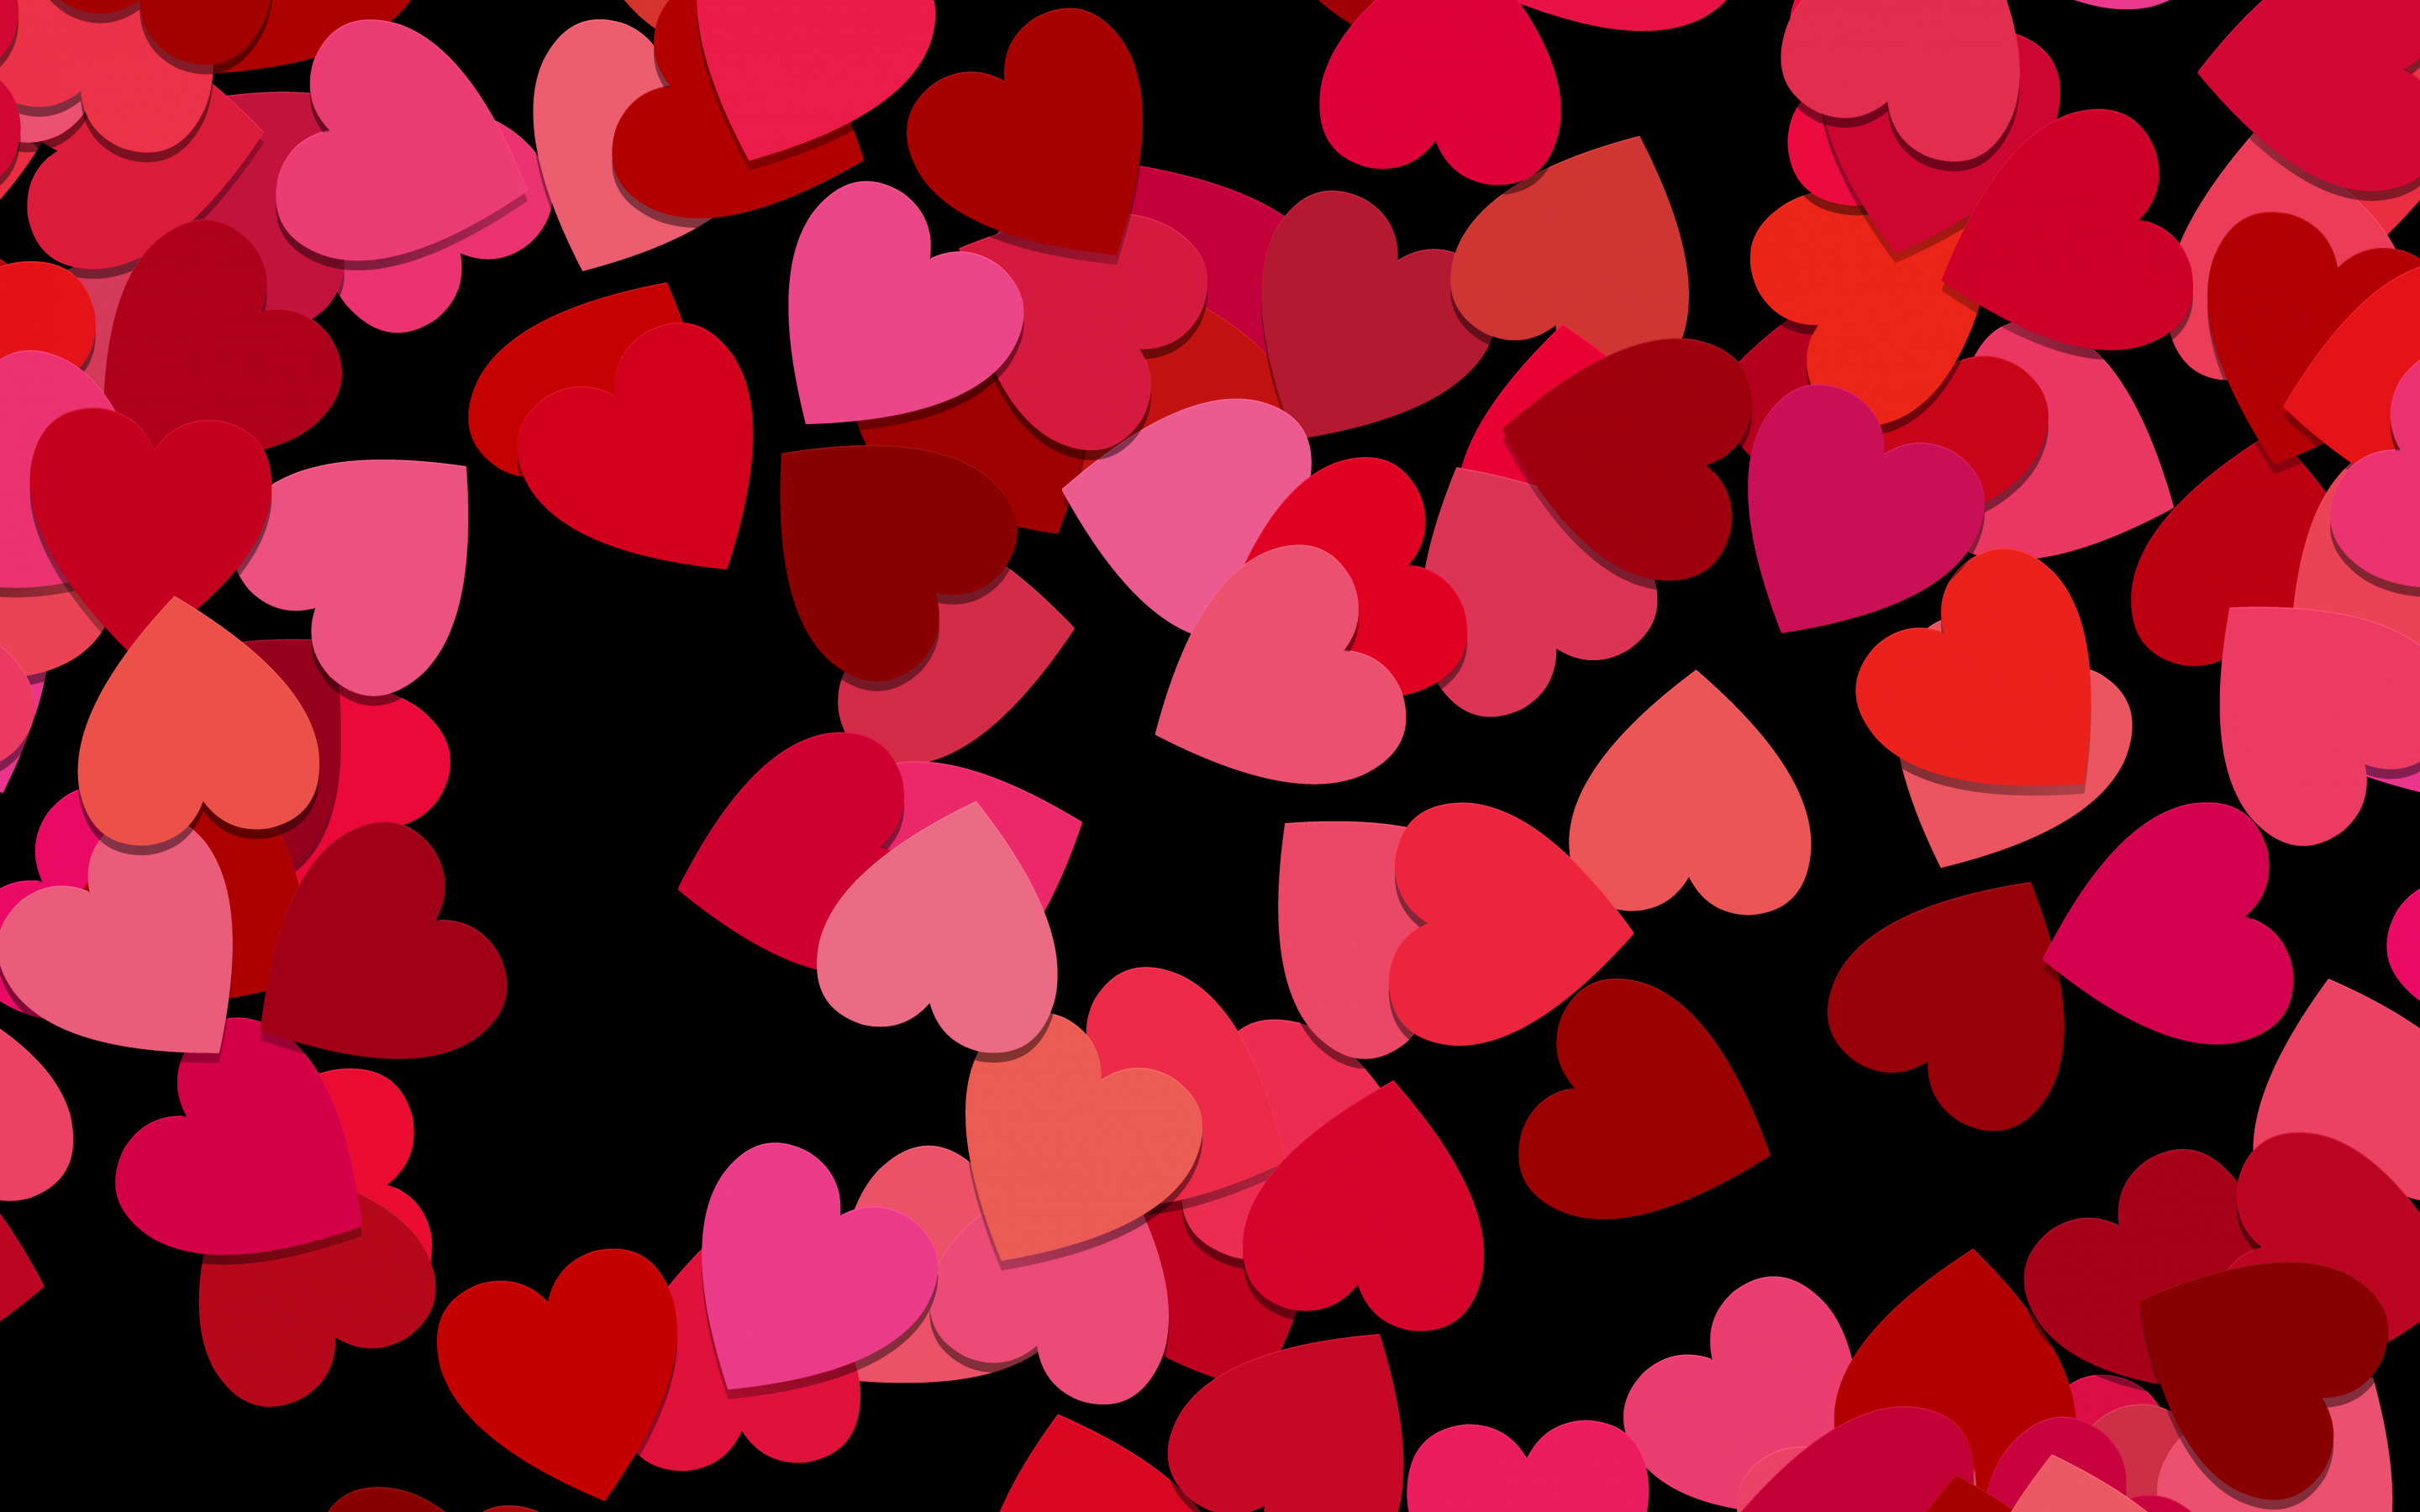 Love hearts Wallpaper 4K, Red hearts, Girly background, 5K, Love